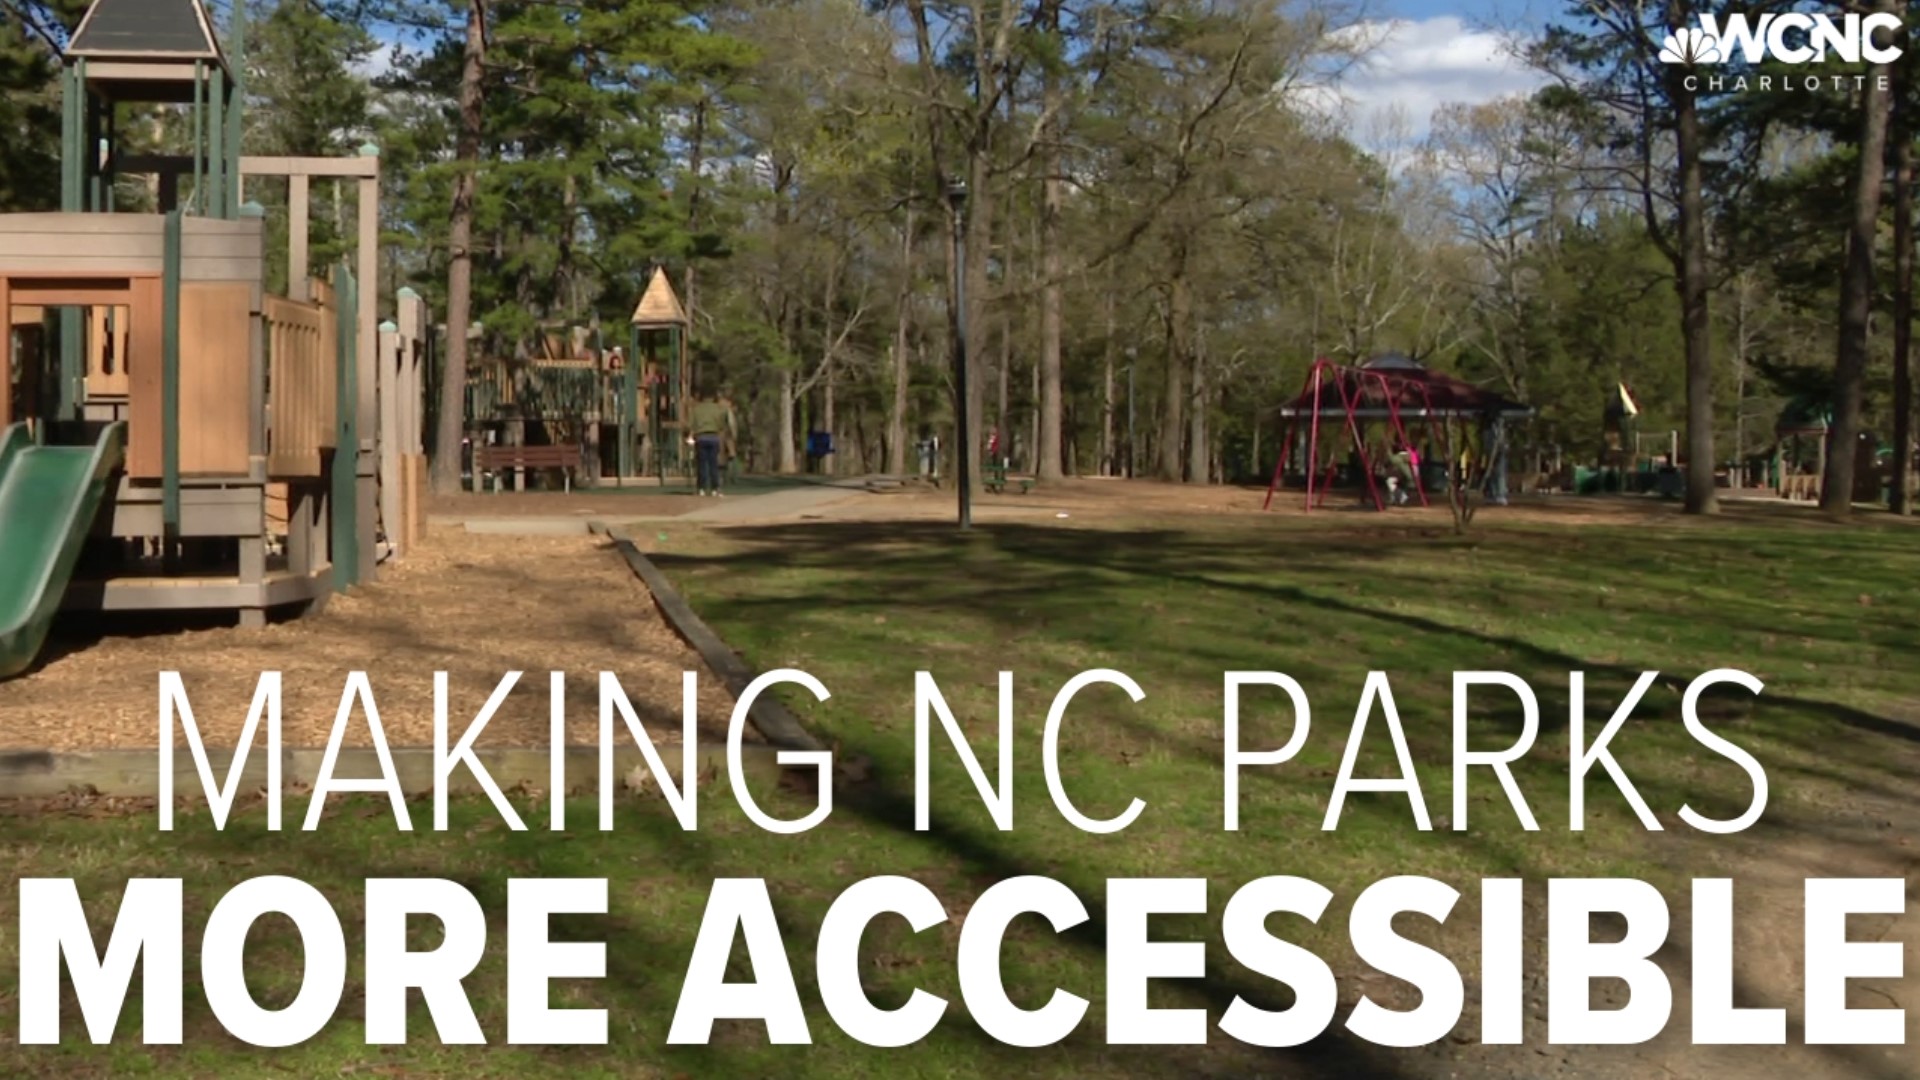 North Carolina Gov. Roy Cooper pledged $9.6 million to create more inclusive parks around the state and four projects are in the Charlotte area.